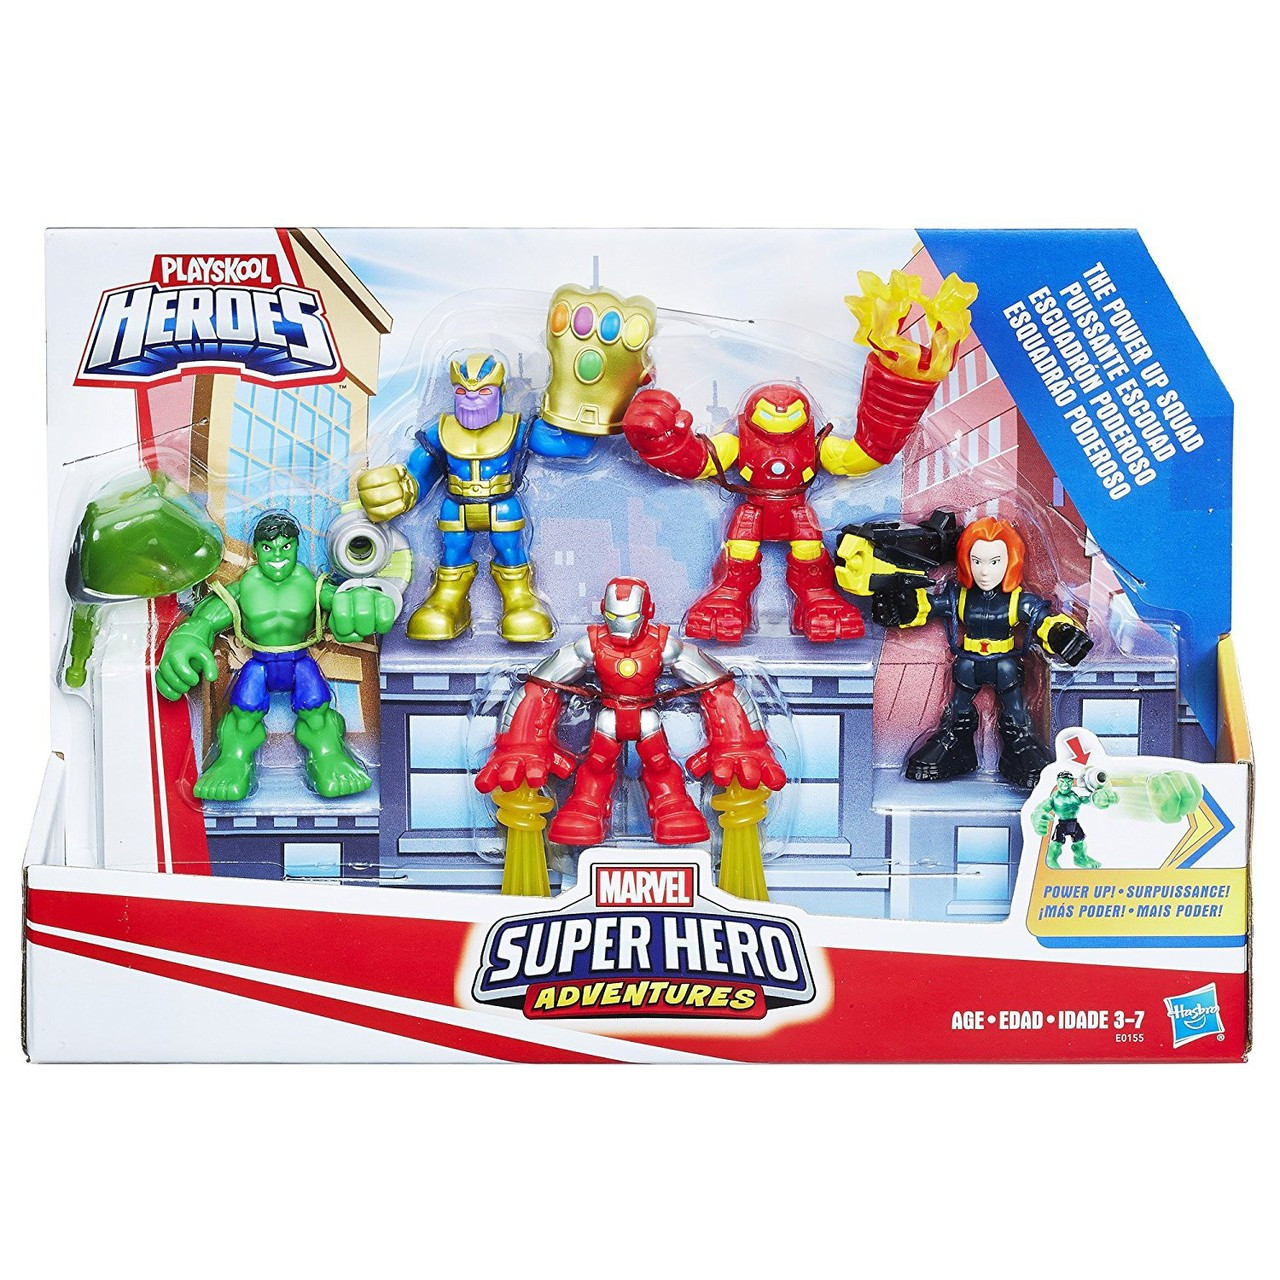 small marvel action figures